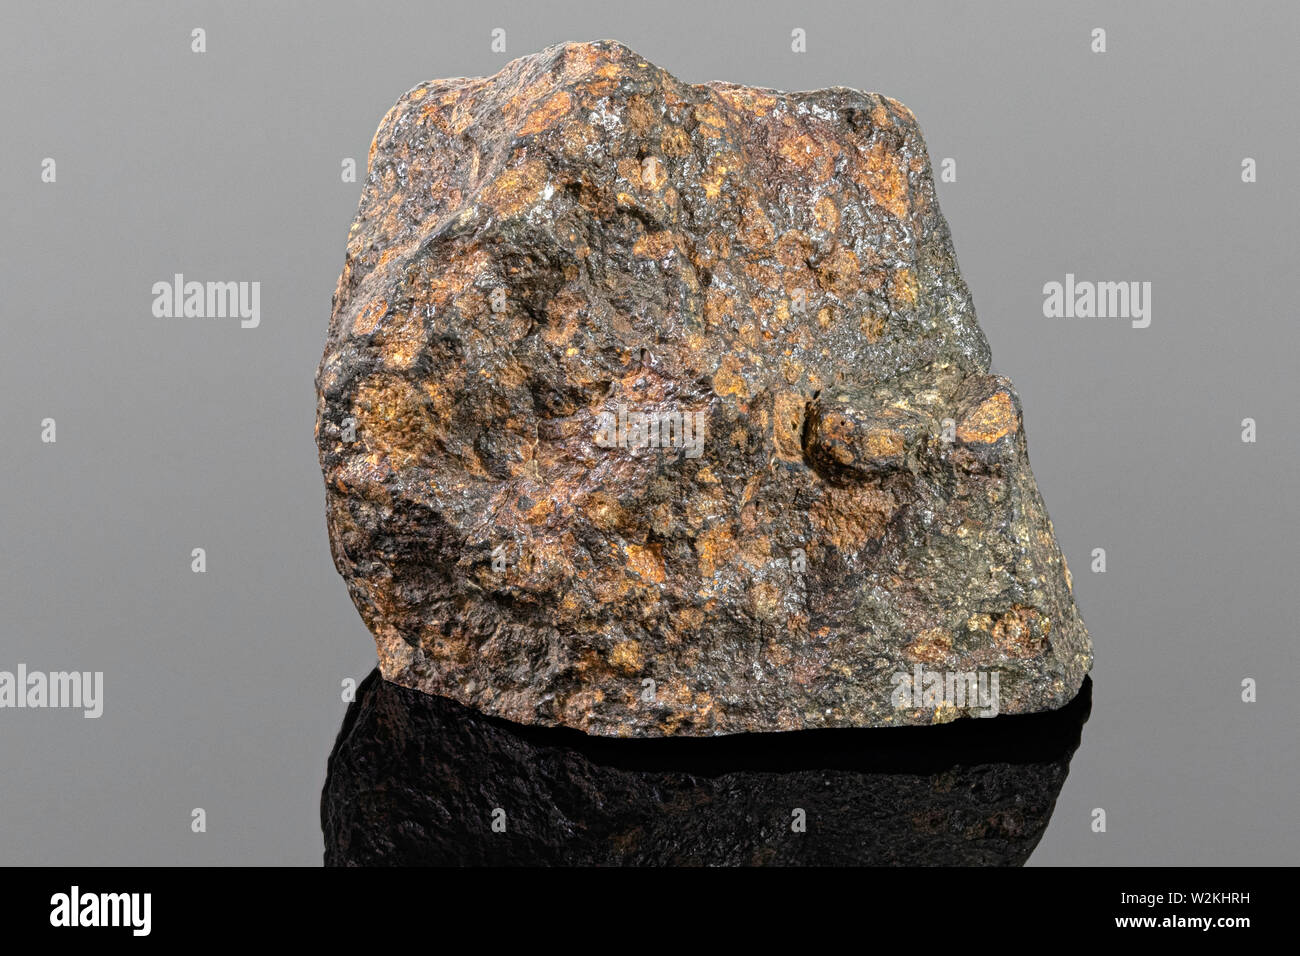 Carbonaceous Chondrite Meteorite (CV3) formed by accretion of dust, small grains and calcium-aluminum-righ inclusions (CAIs) in the early Solar System Stock Photo